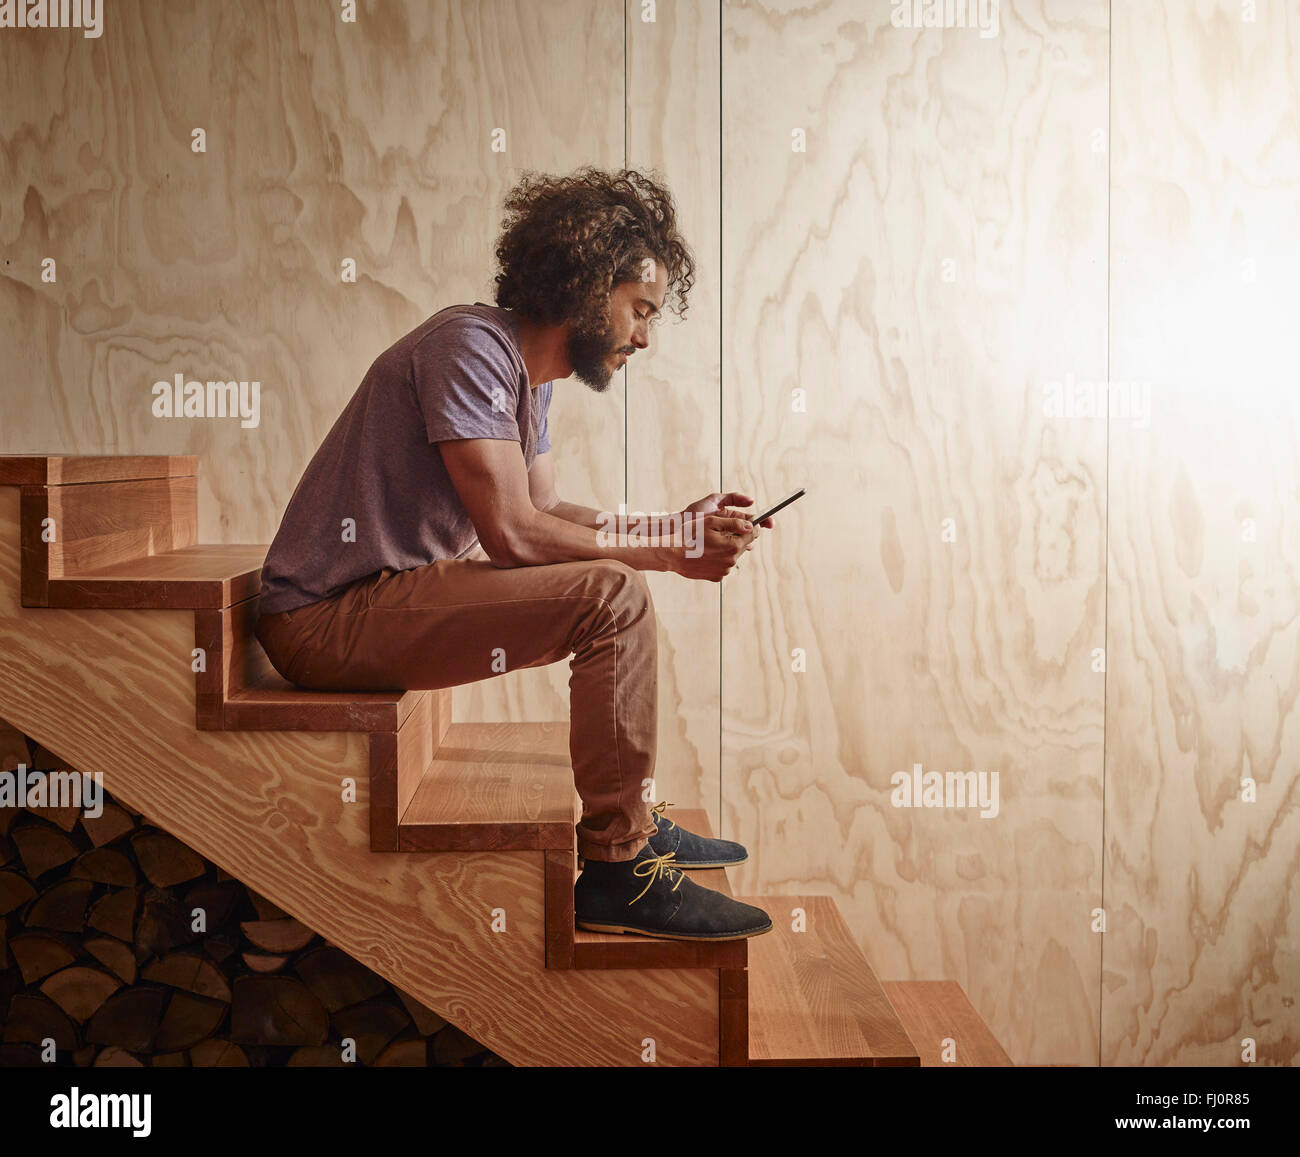 Young man sitting on wooden stairs looking at digital tablet Stock Photo